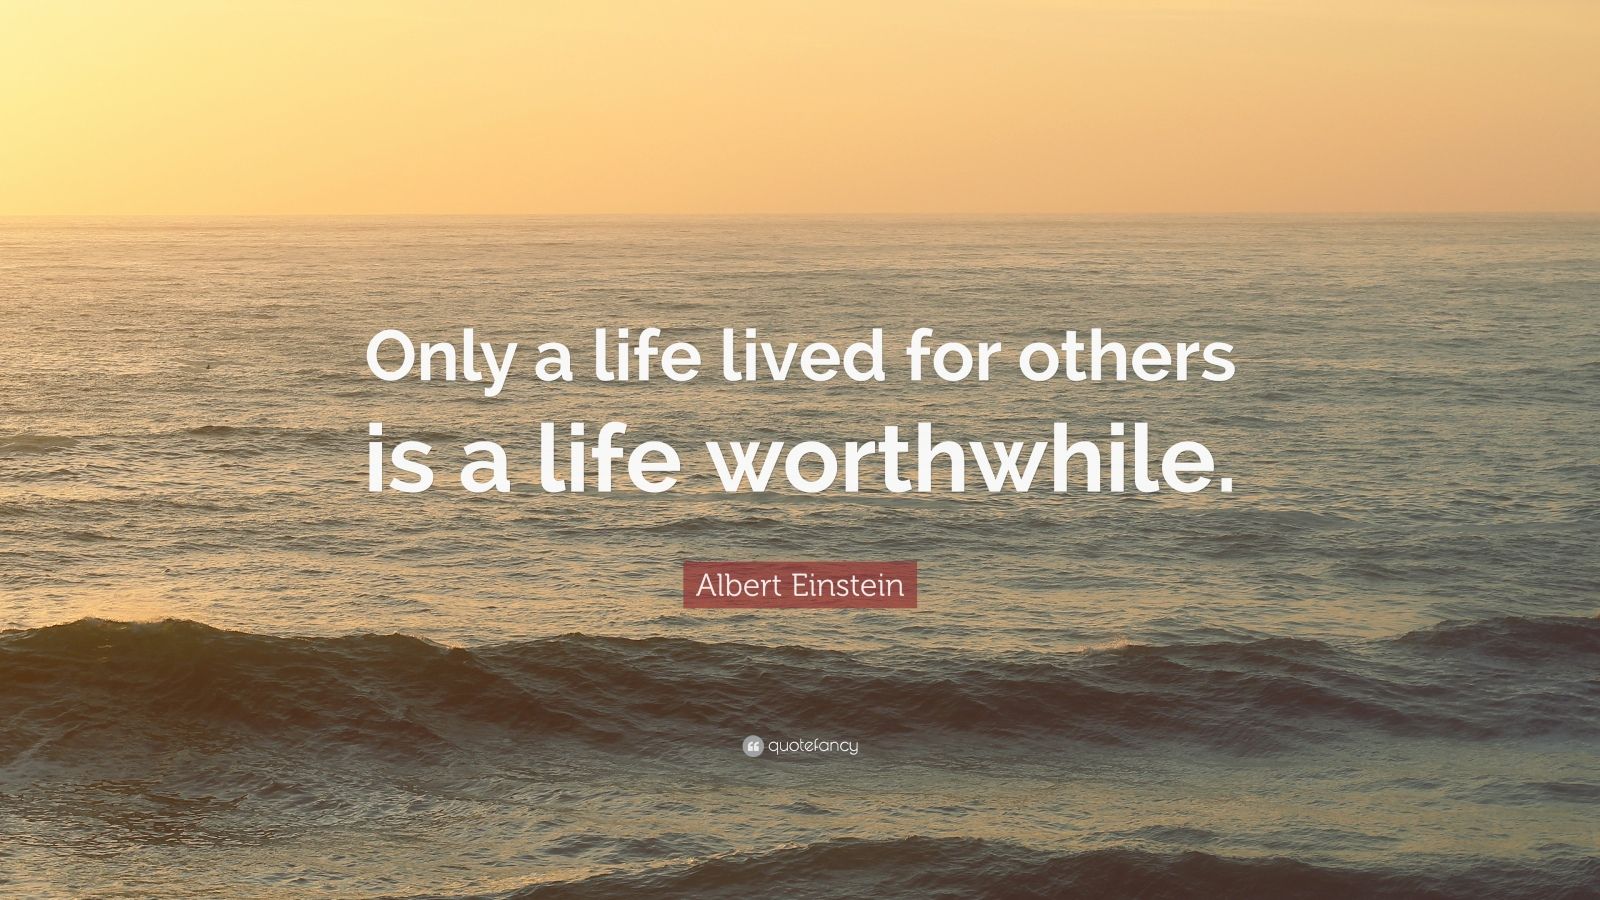 Albert Einstein Quote: “Only a life lived for others is a life